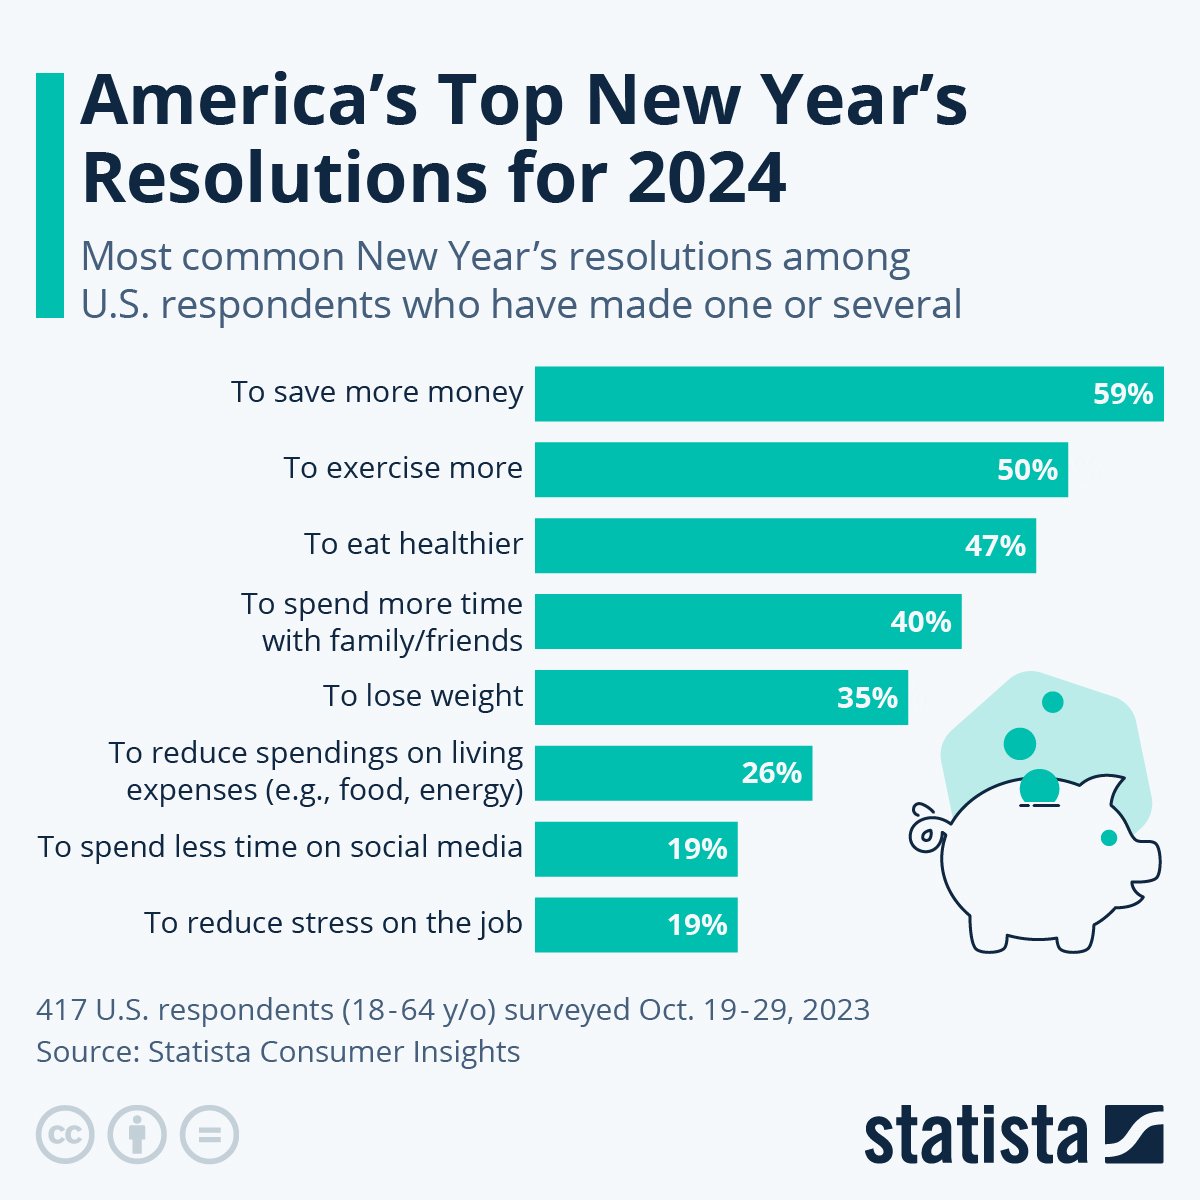 chart showing top new year's resolutions according to a survey